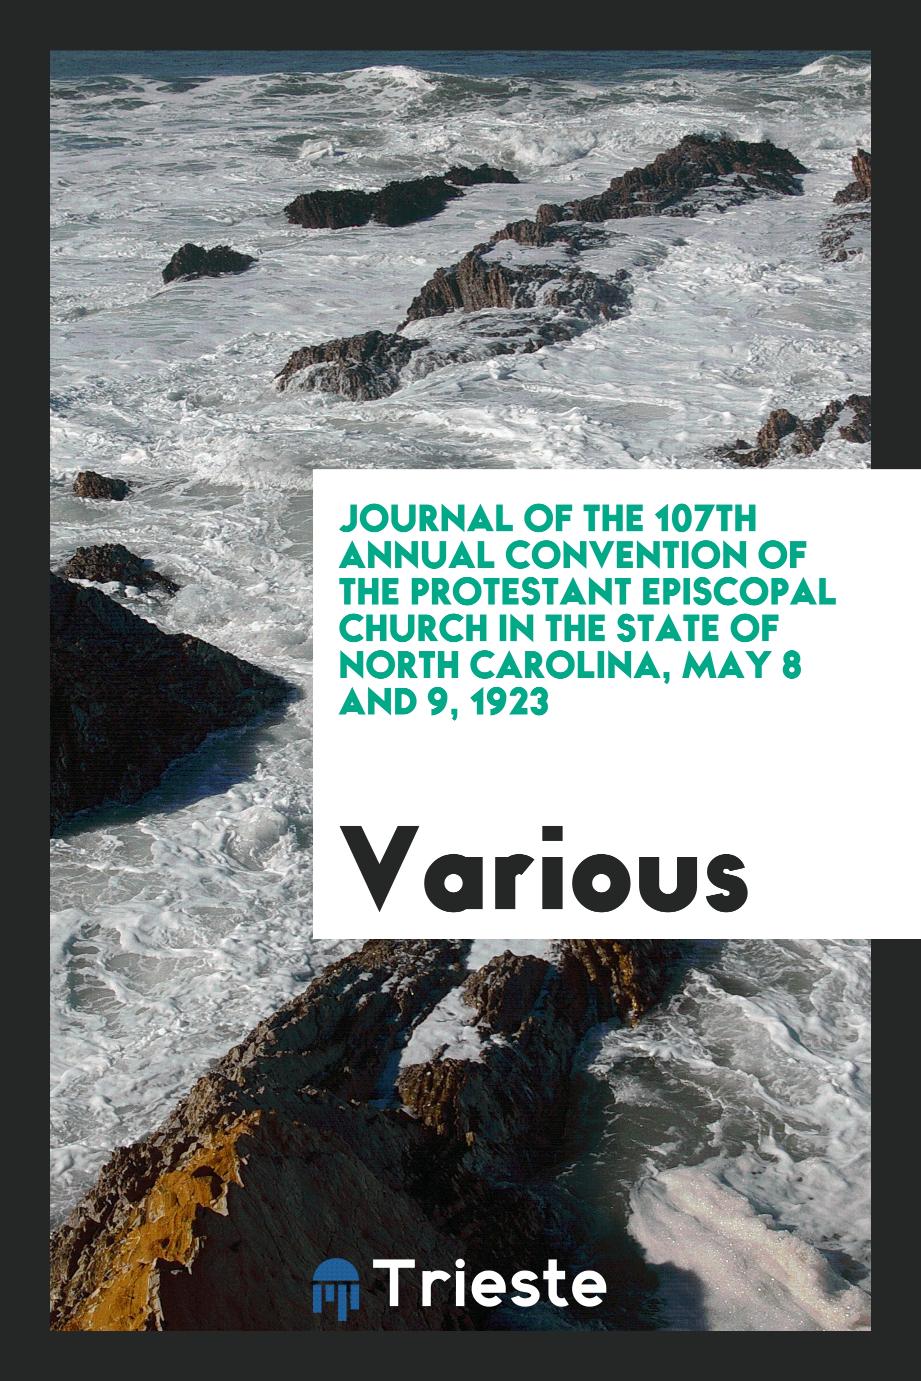 Journal of the 107th annual convention of the Protestant Episcopal Church in the state of North Carolina, May 8 and 9, 1923